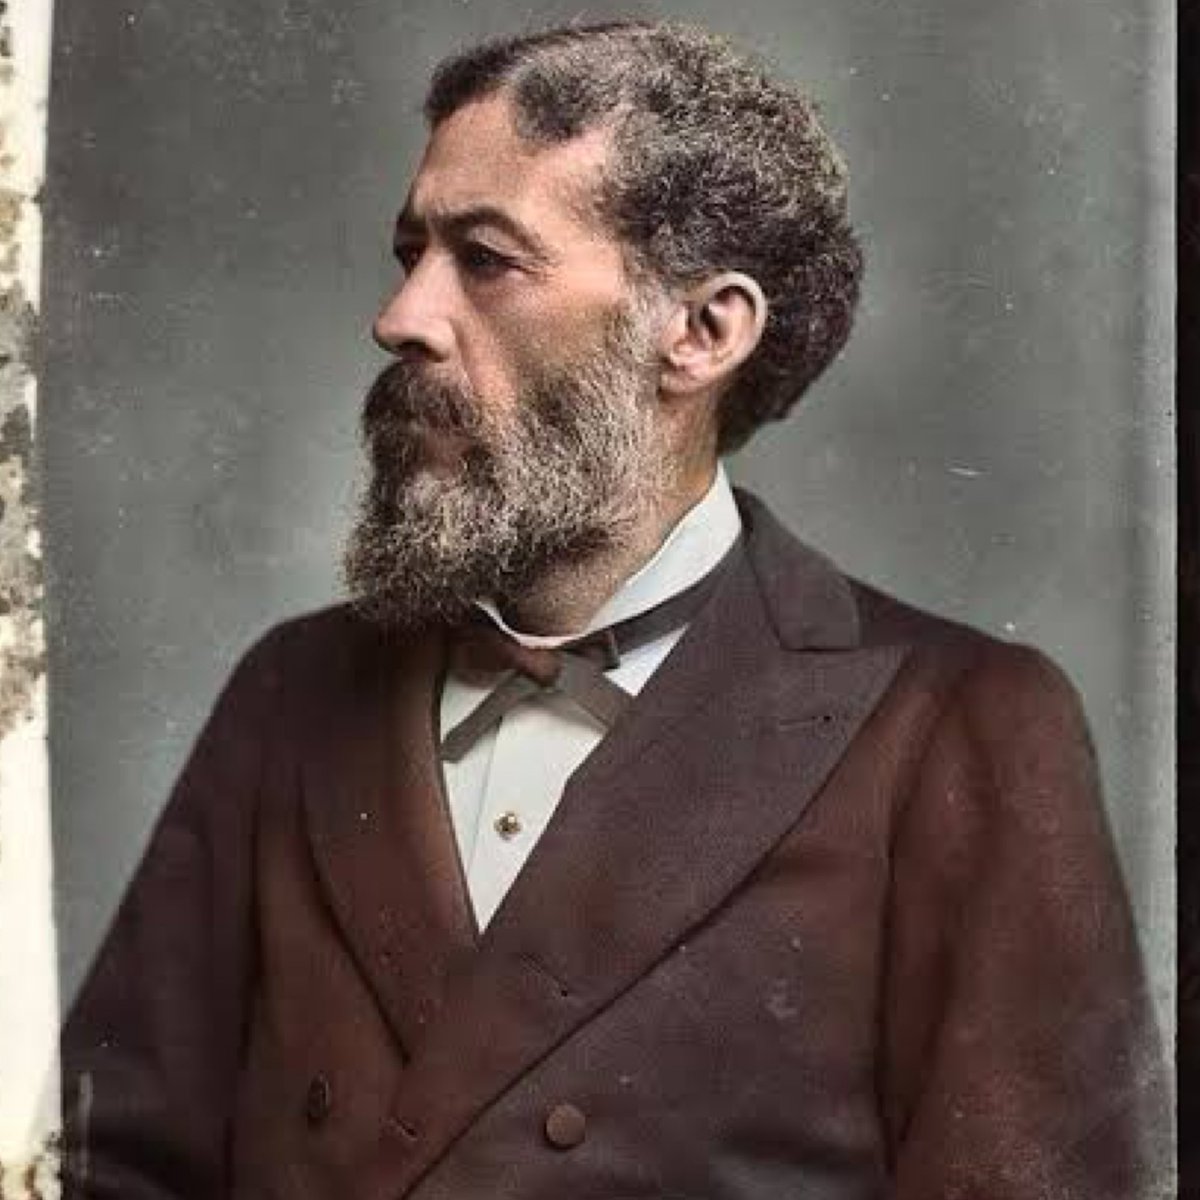 John Mercer Langston was the first black man to become a lawyer in Ohio when he passed the Bar in 1854. He was the founding dean of the law school at Howard University, he helped draft the Civil Rights Act of 1875, co-founded the National Equal Rights League 1864 and was the